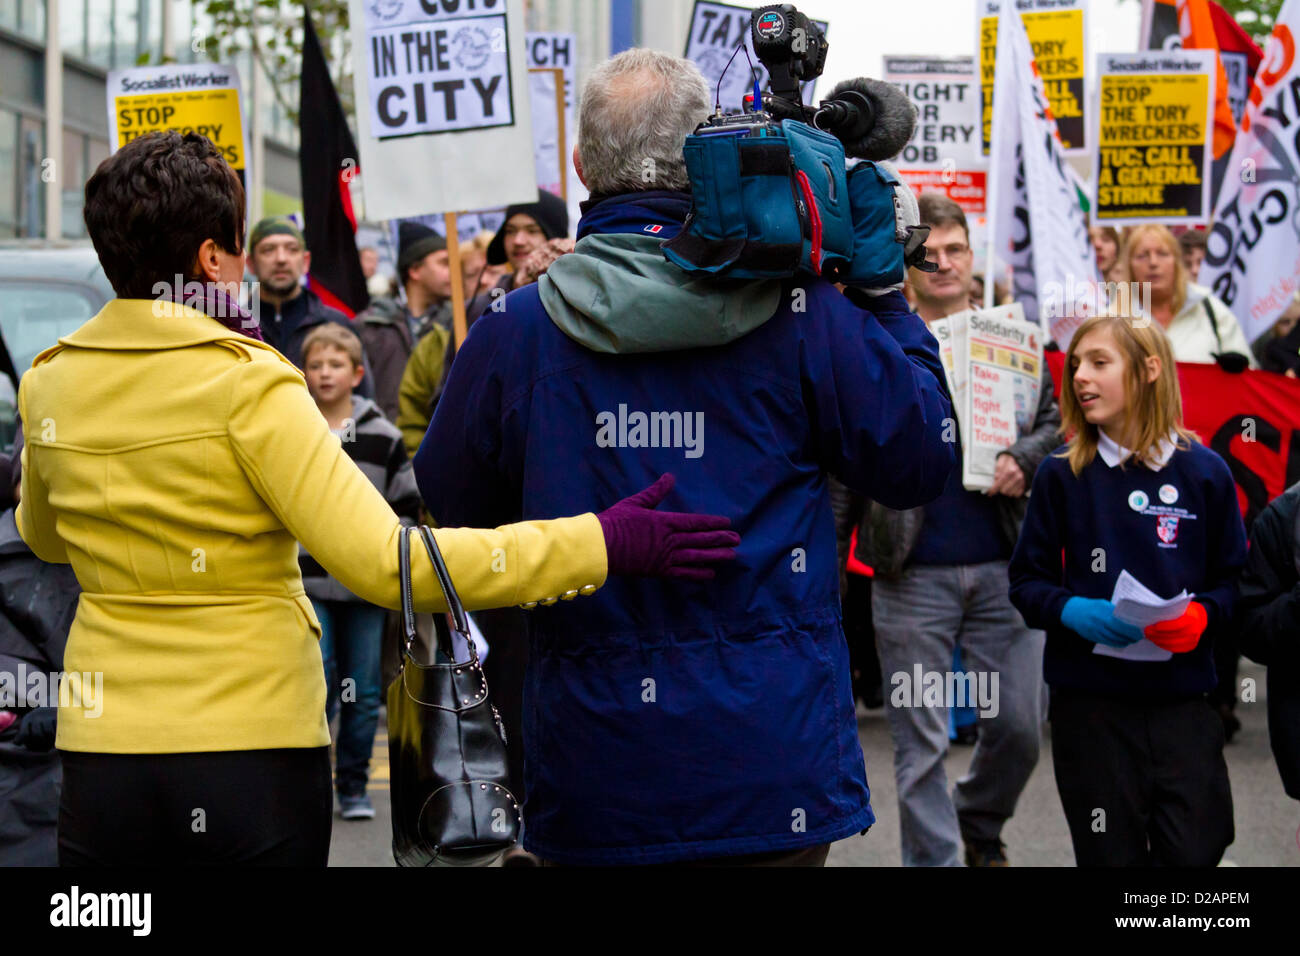 TV news media. Journalist and video camera operator at a demonstration and march, Nottingham, England, UK Stock Photo